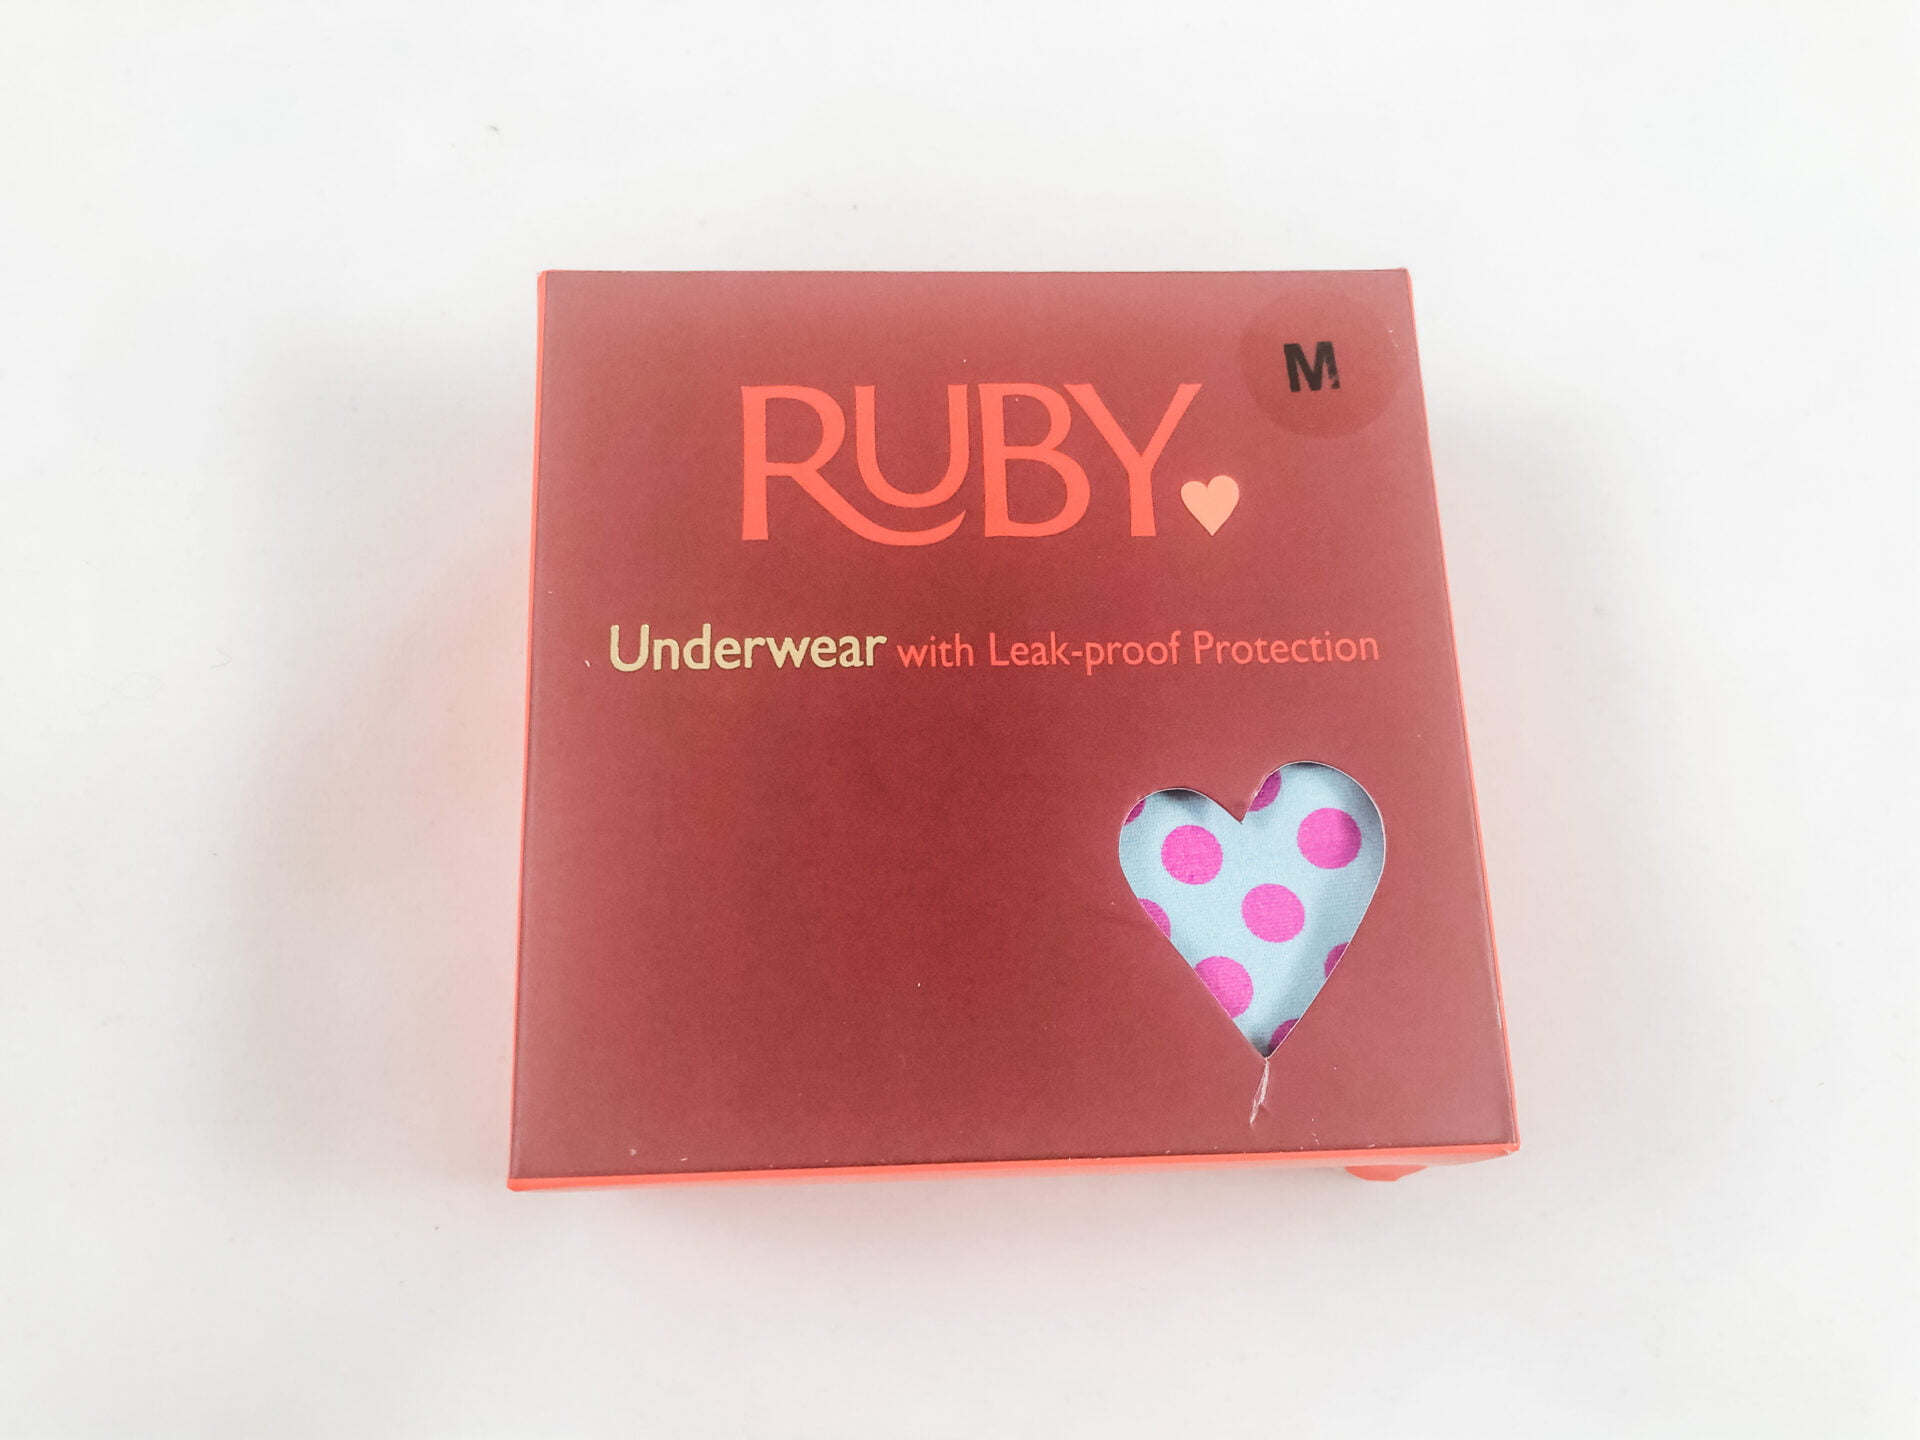 Red Ruby Period Underwear PFAS "Forever Chemicals" Lab Report Outcome